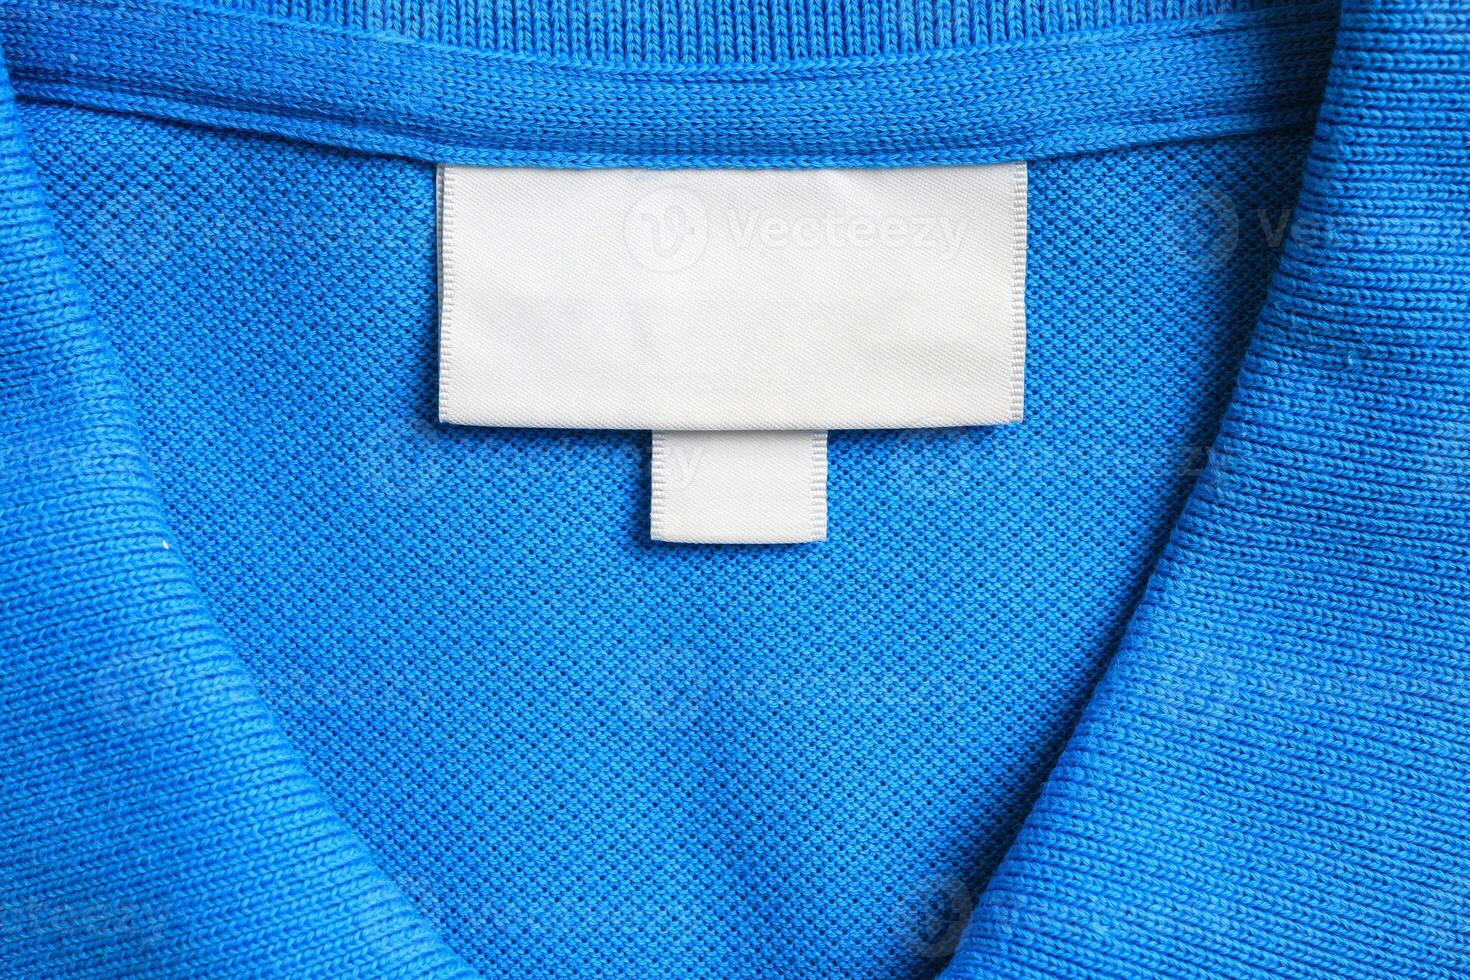 Blank white laundry care clothes label on blue shirt fabric texture background photo